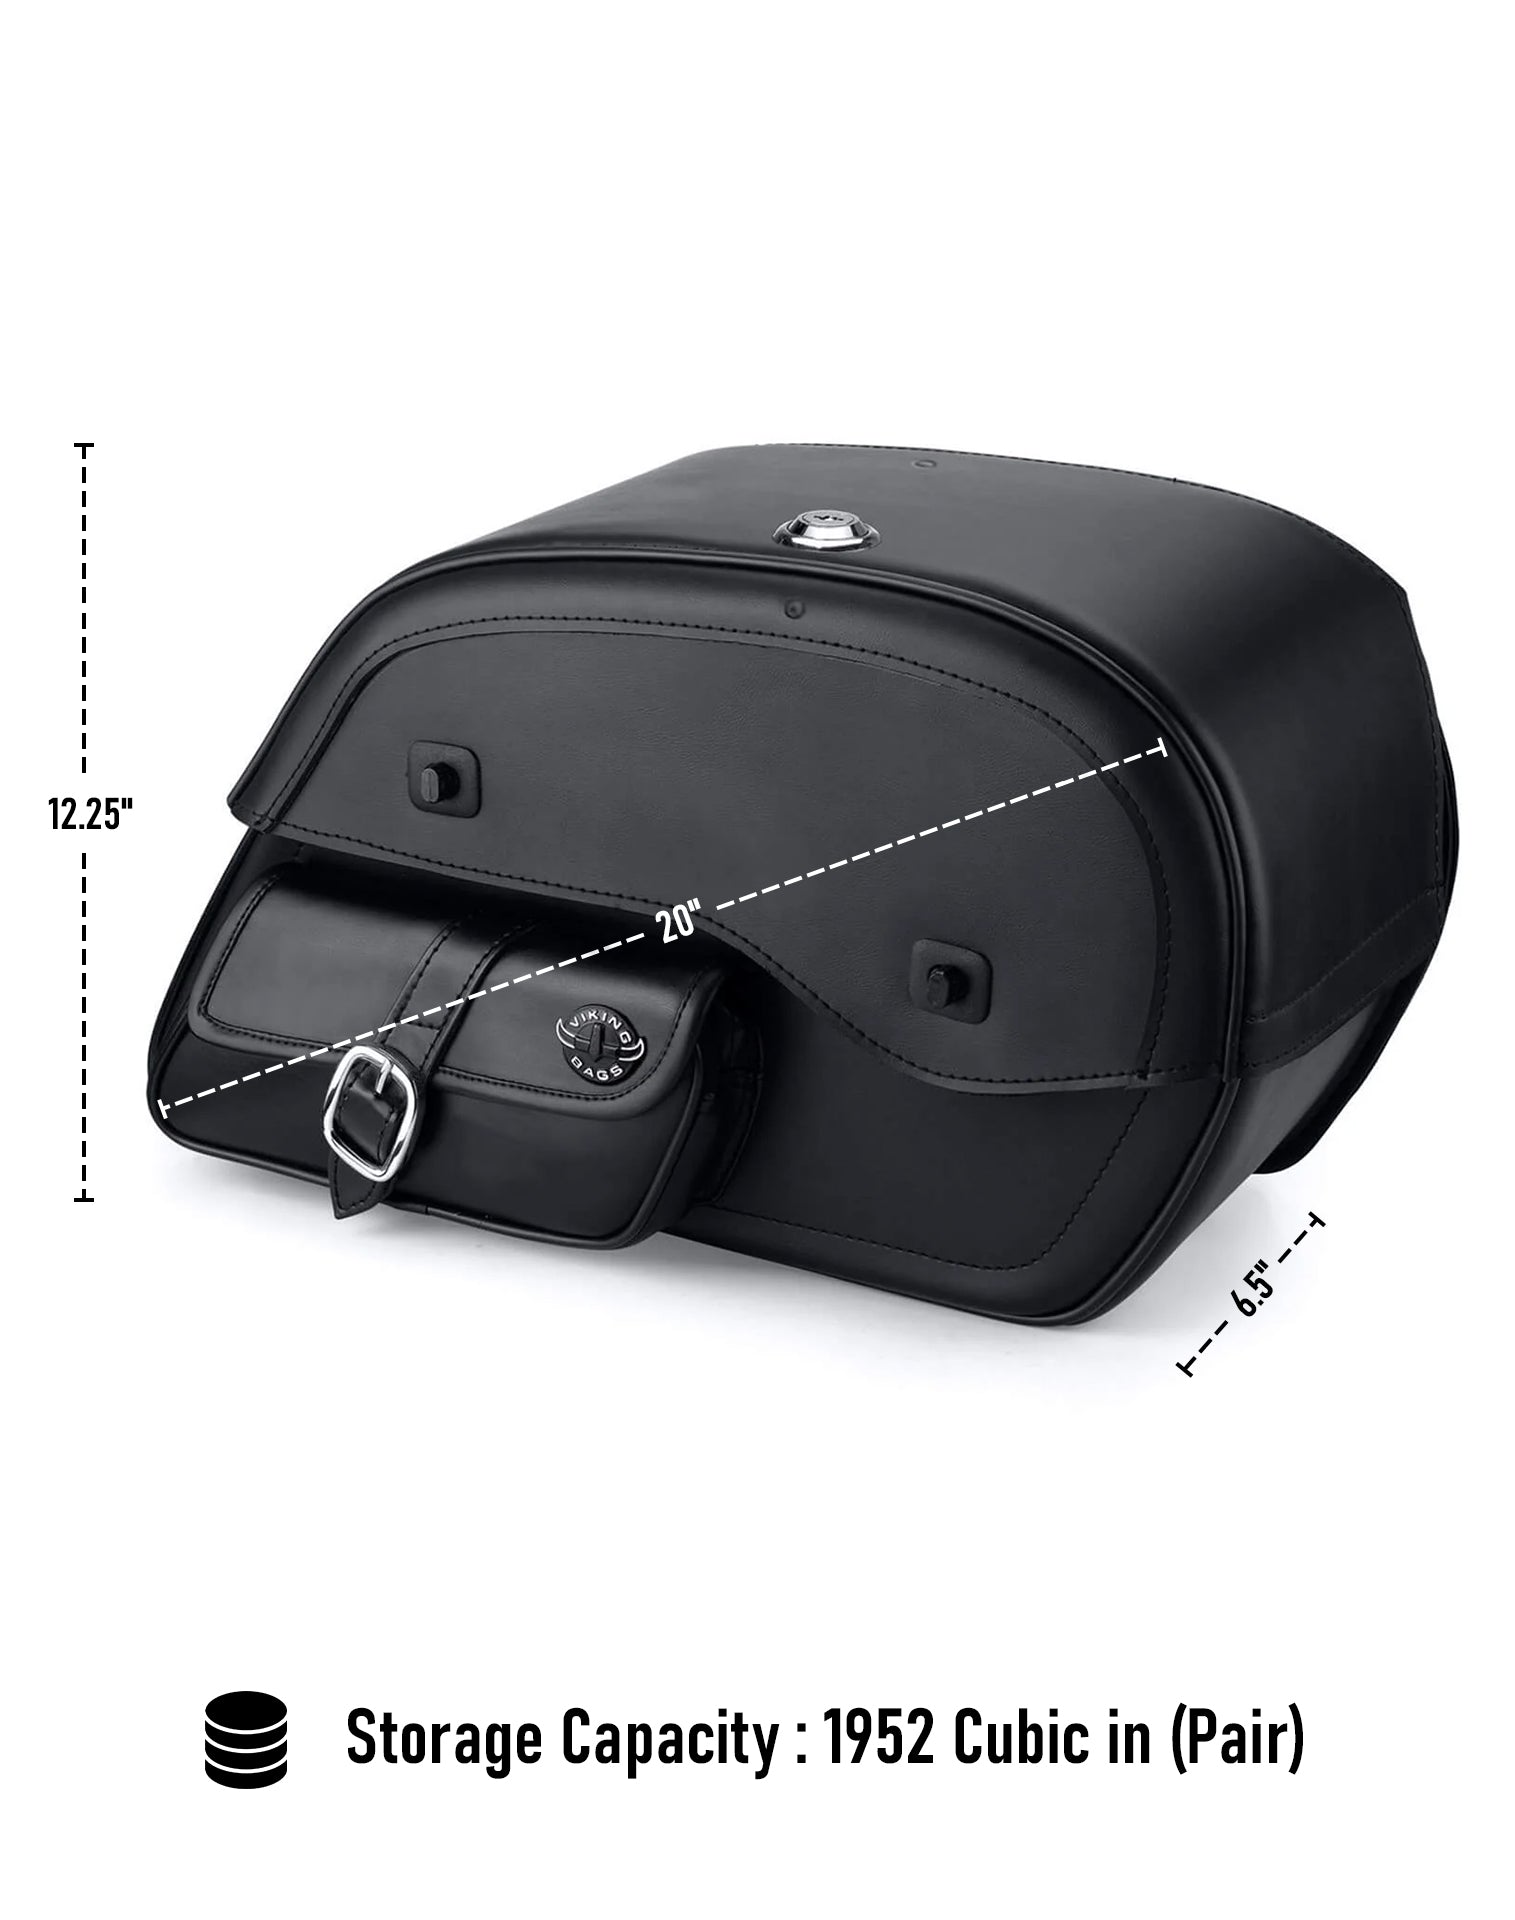 Viking Essential Side Pocket Large Yamaha V Star 1300 Classic Xvs1300A Leather Motorcycle Saddlebags Can Store Your Ridings Gears